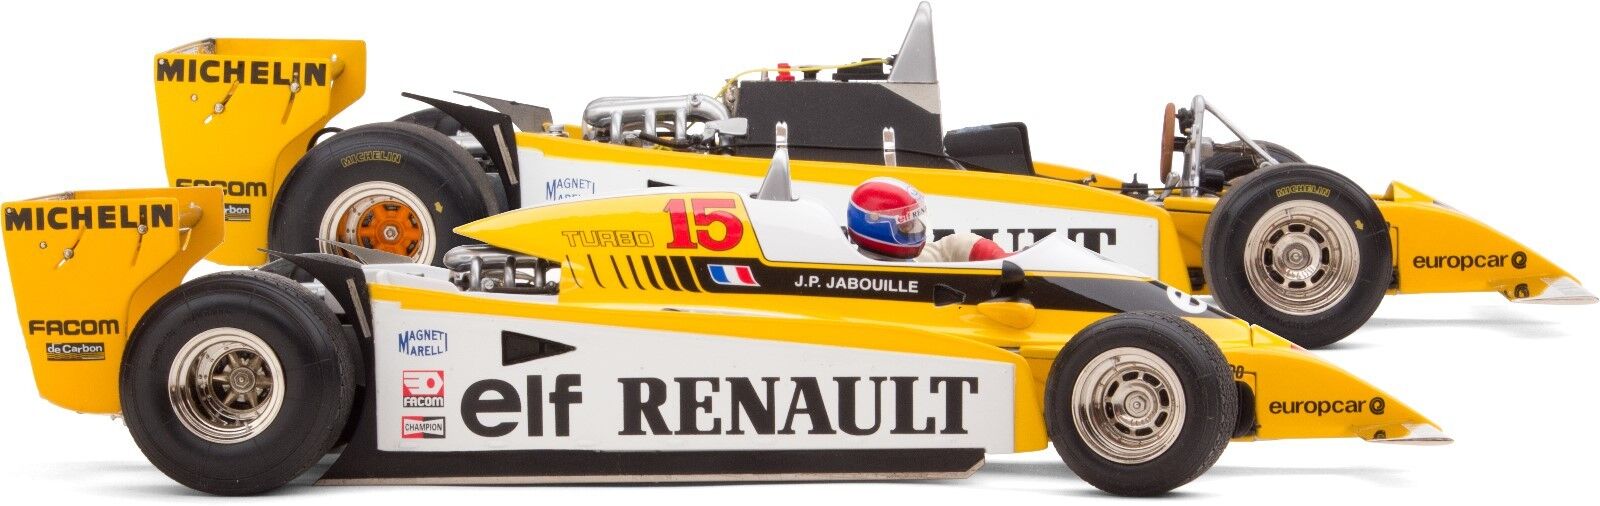 Exoto | 1:18 | SPECIAL OFFER | 1981 Renault RE-20 Turbo F1 Set of 2 Cars